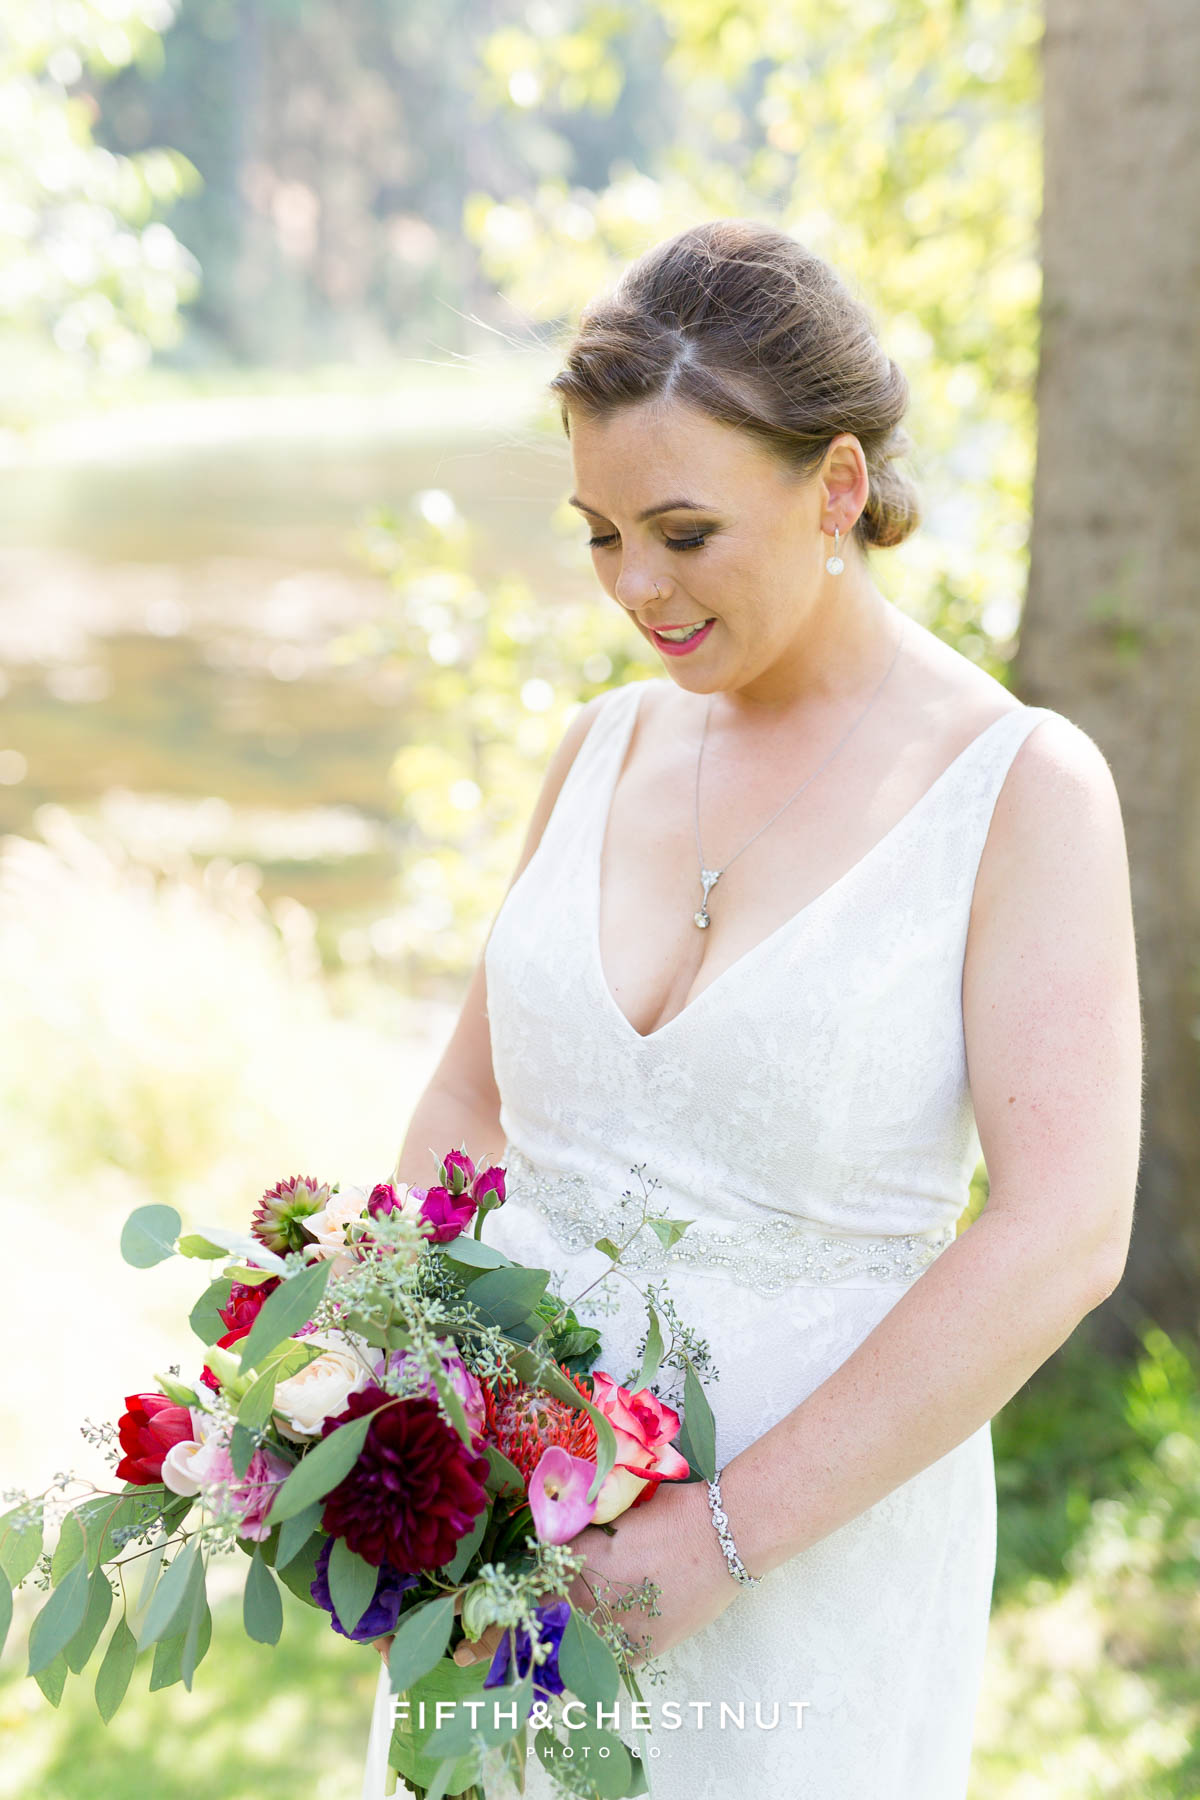 bride looks down at her wedding flowers while wearing a lacy white wedding dress